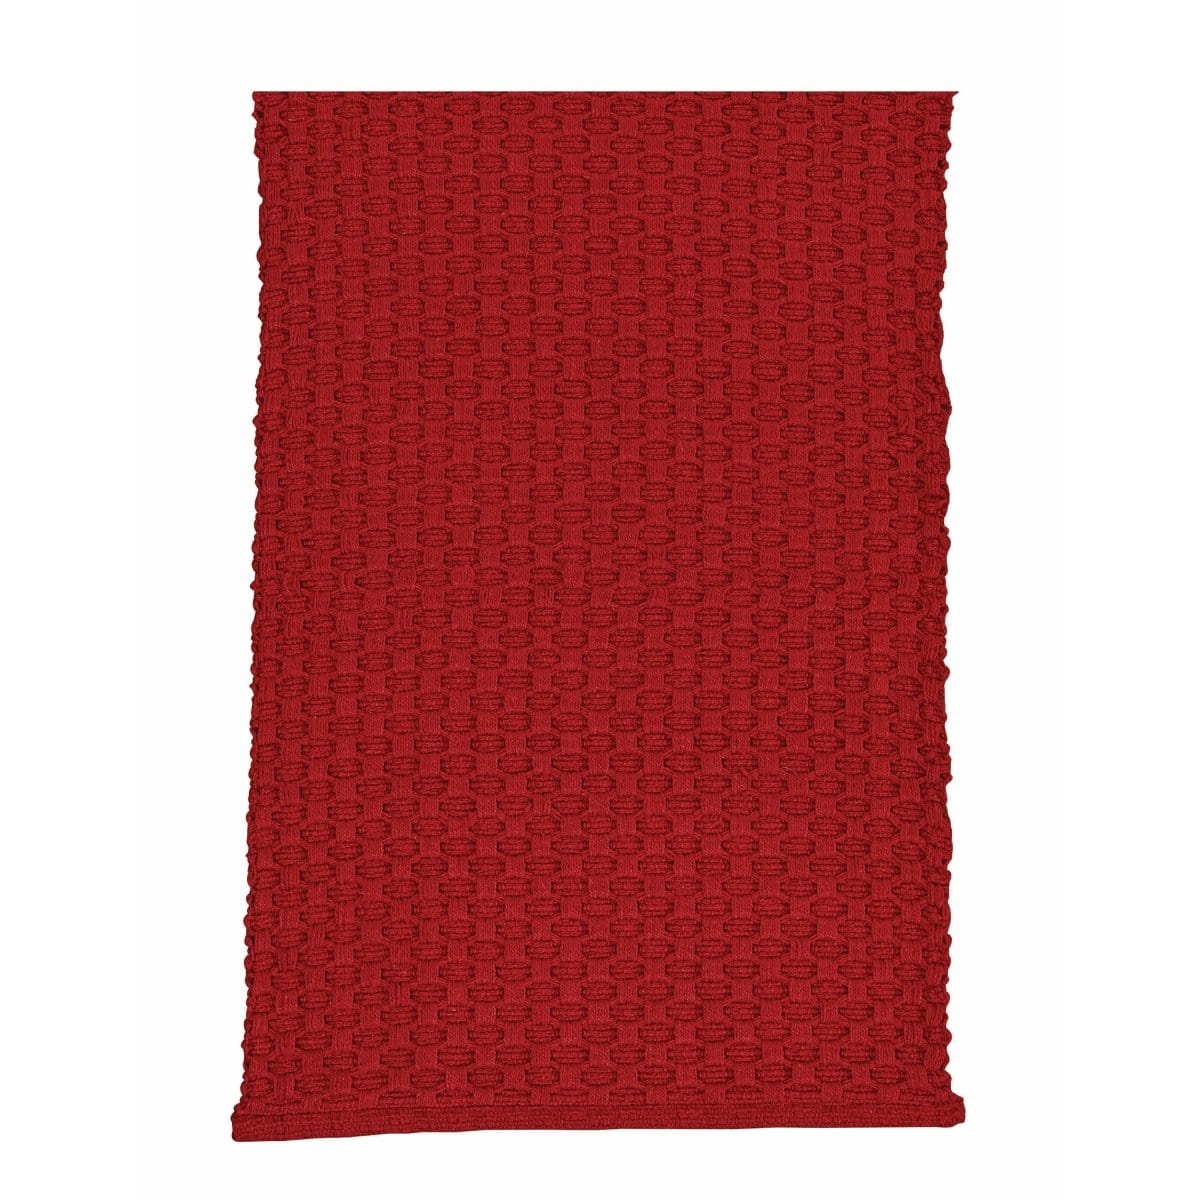 Chadwick in Red Table Runner 54" Long-Park Designs-The Village Merchant